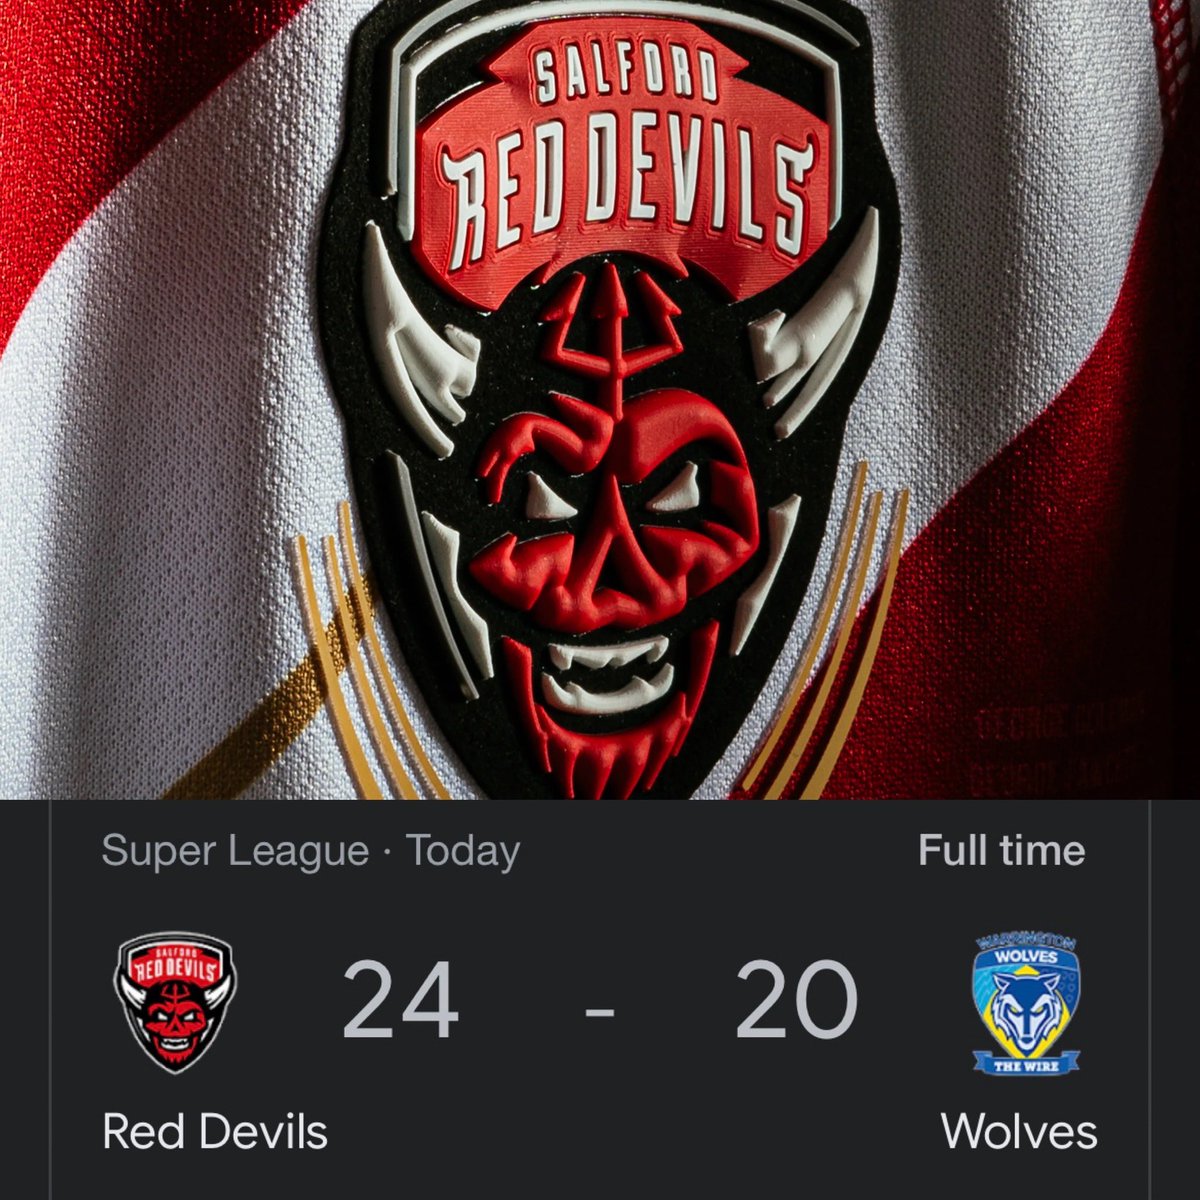 Get in Salford.!!!!!!! 👹🏉 
You don’t like doing things the easy way 👏🏻 🏉🏉🏉🏉🏉🏉 #reddevils #salfordreddevils #salford